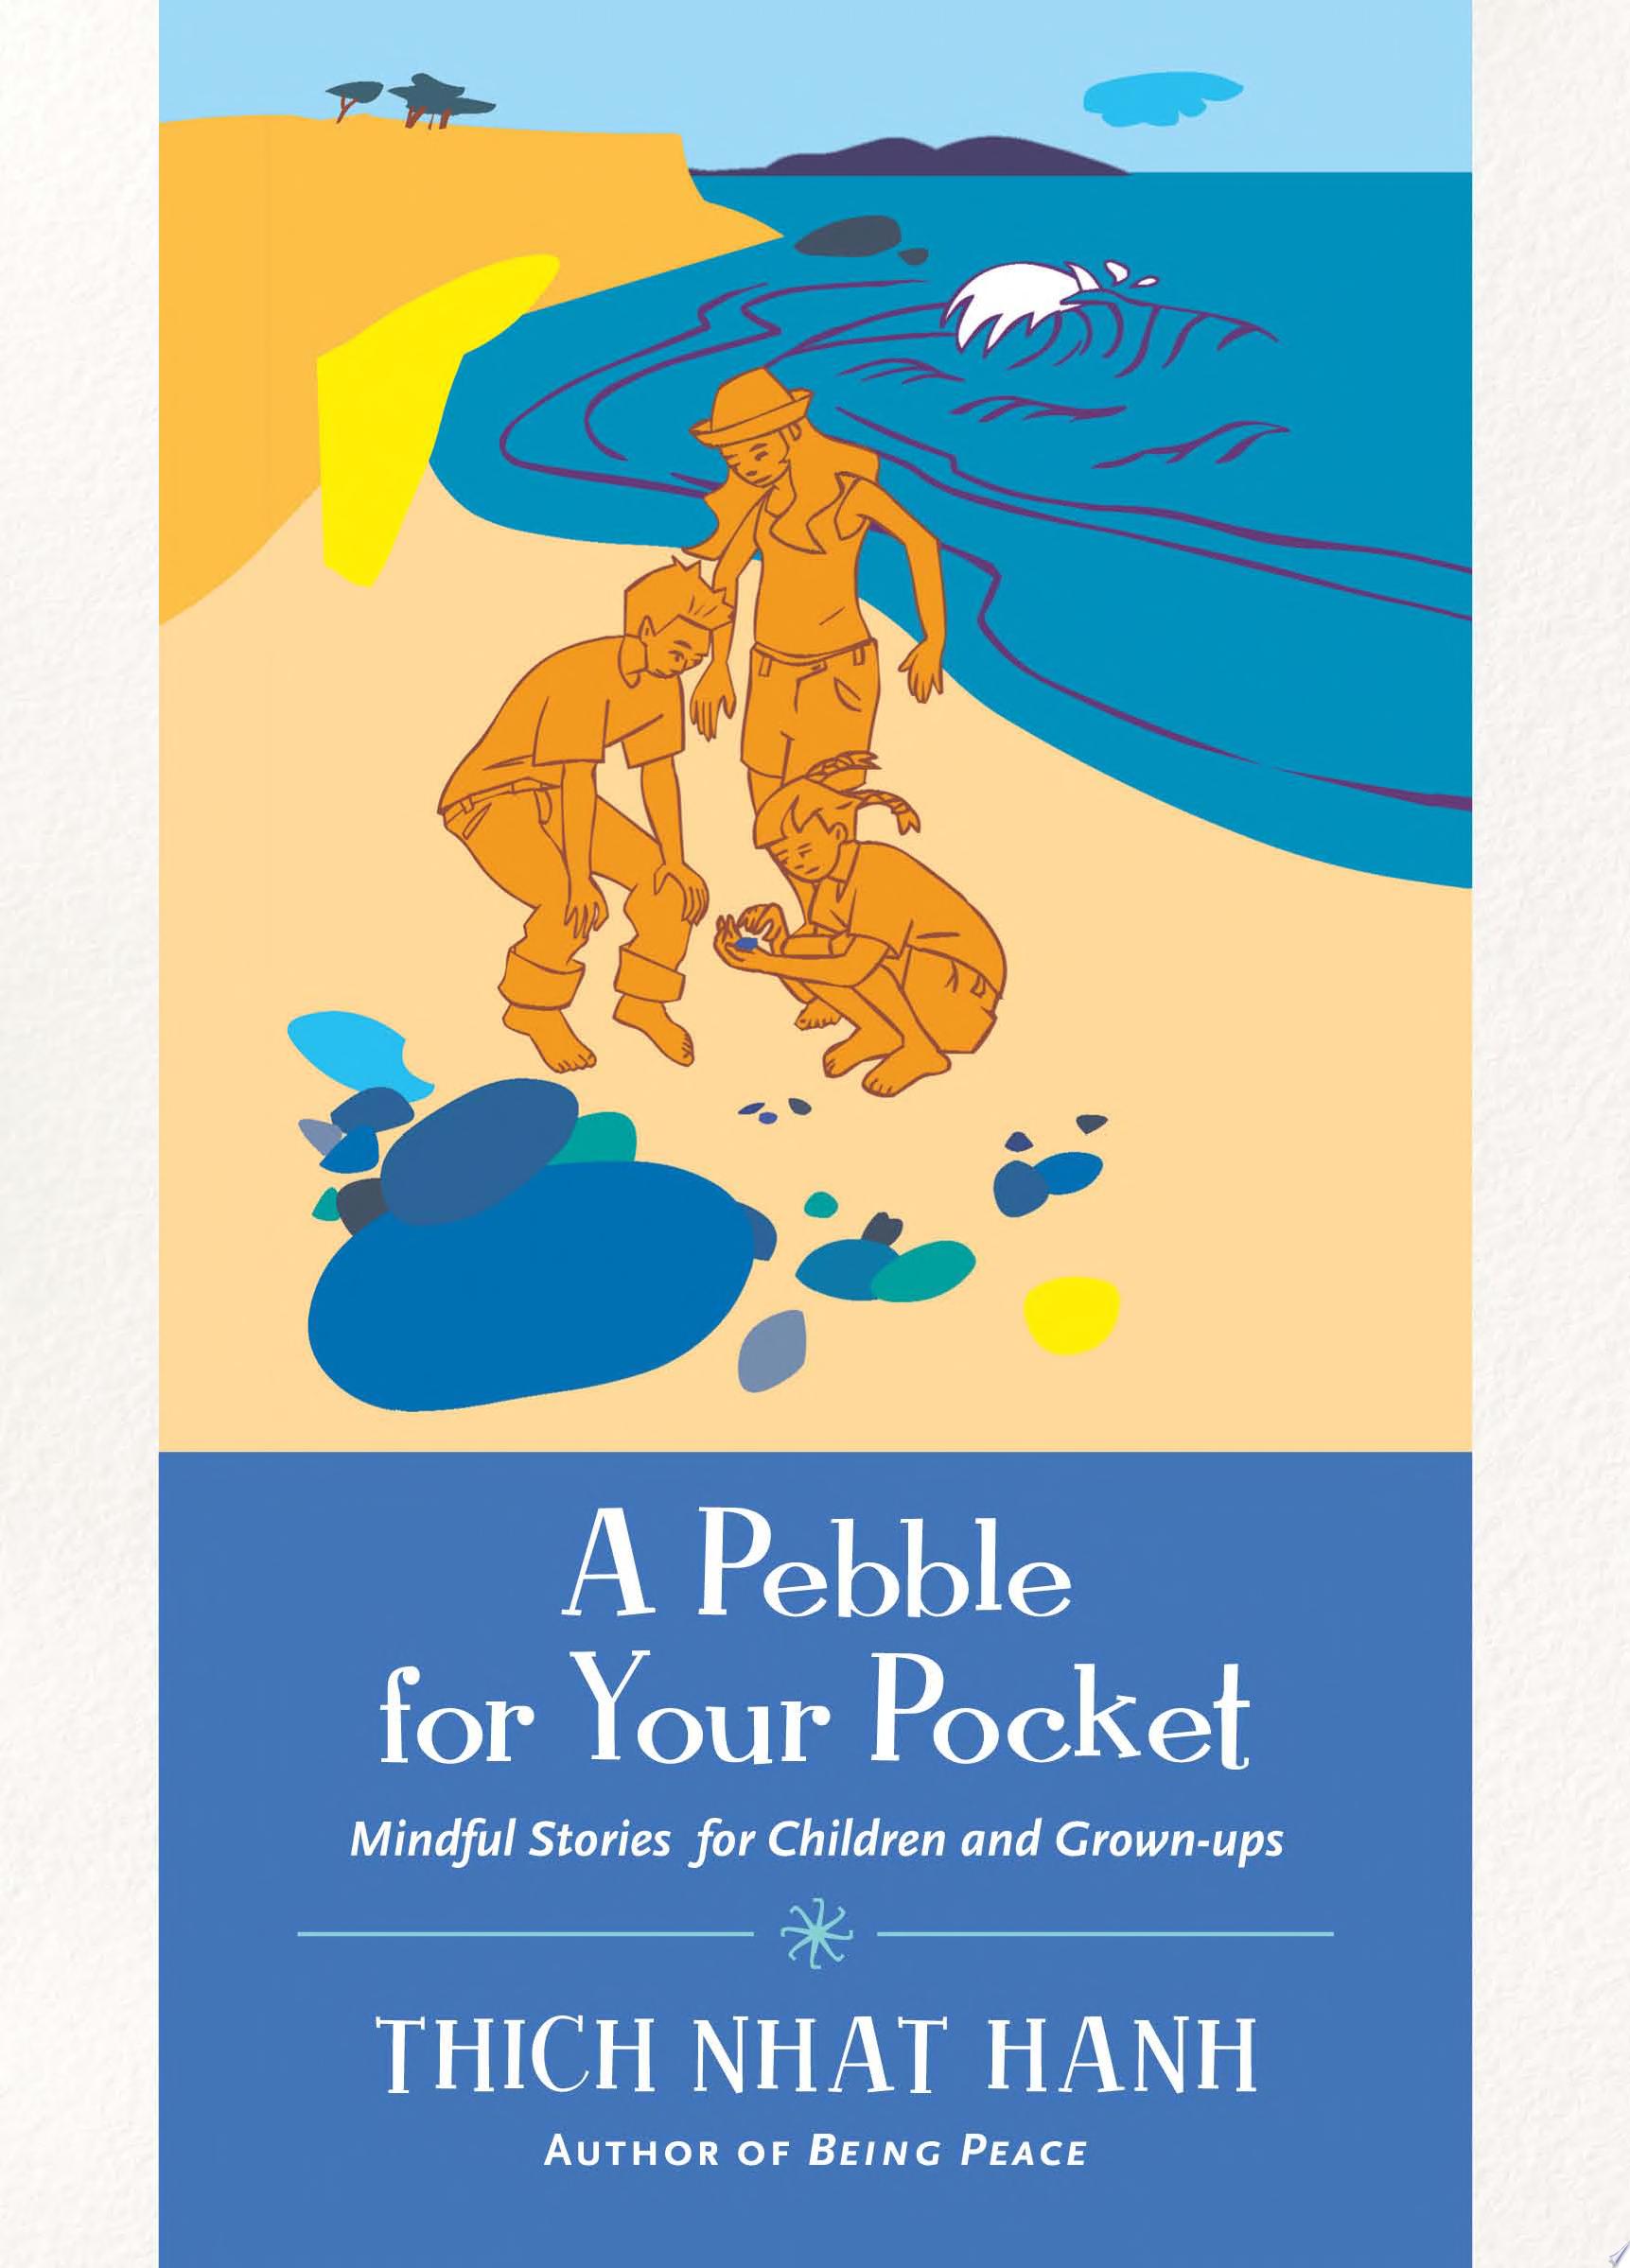 Image for "A Pebble for Your Pocket"